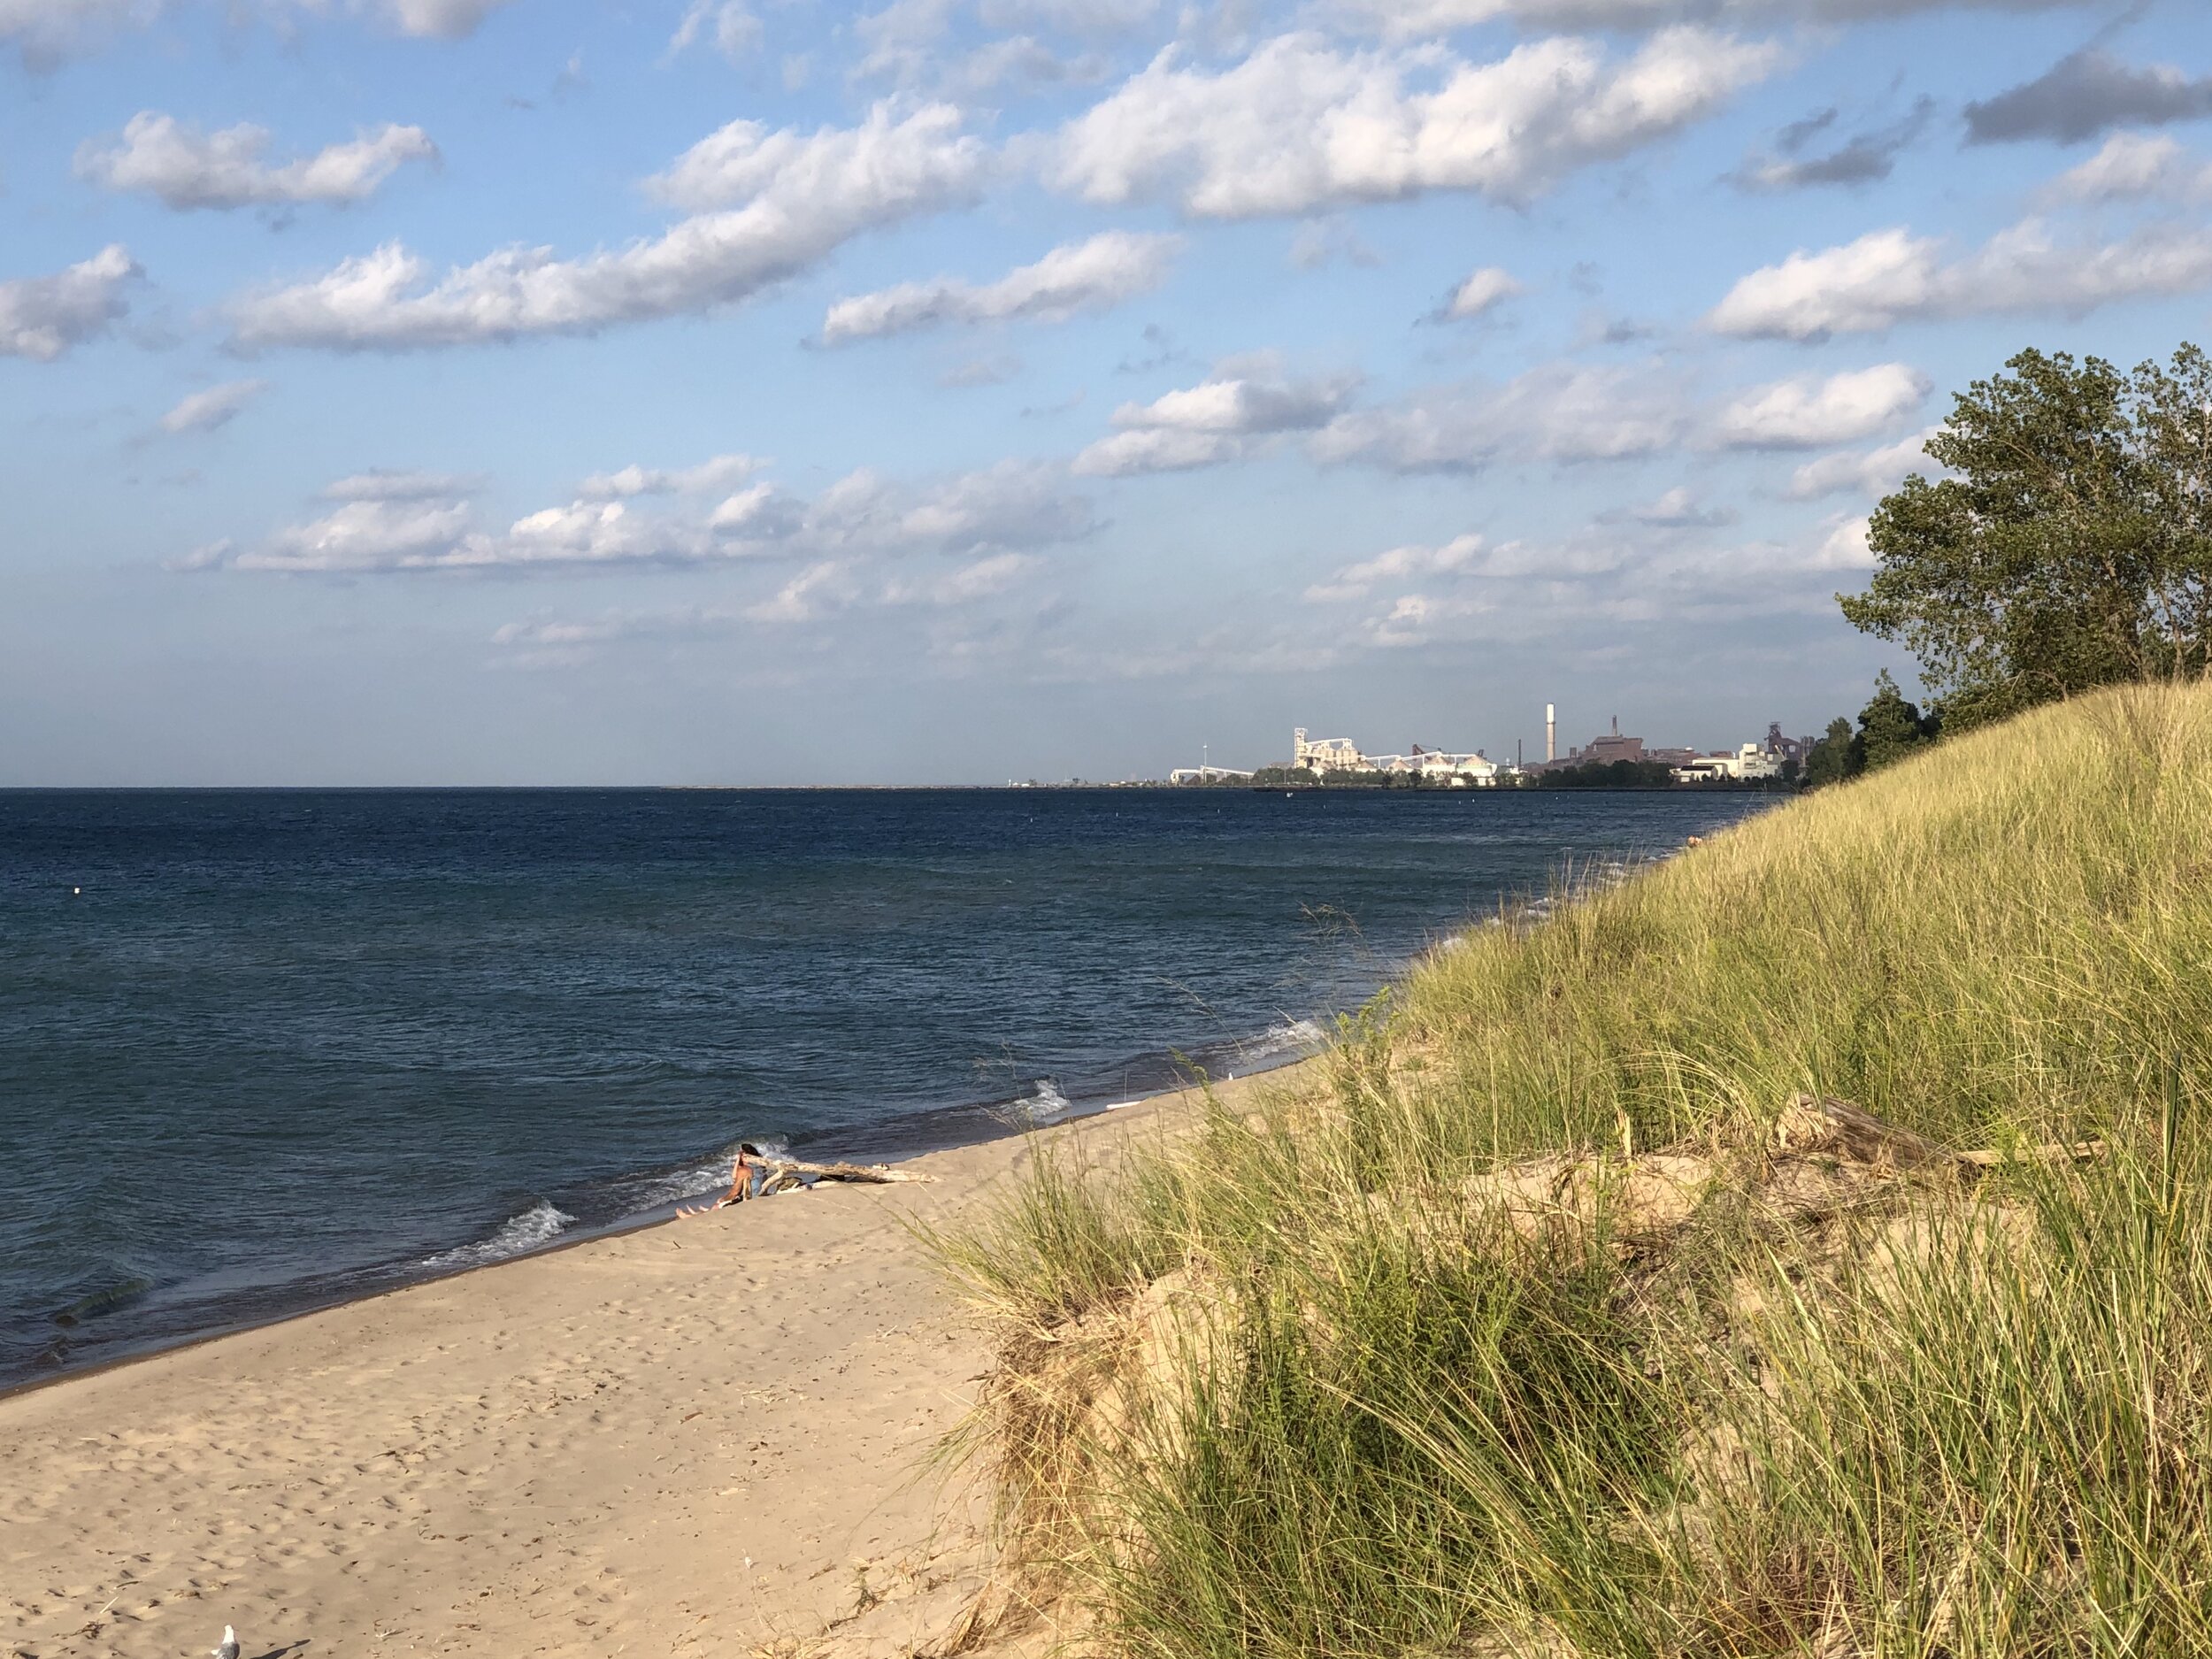 Indiana Dunes preserves precious natural areas adjacent to industrial development.